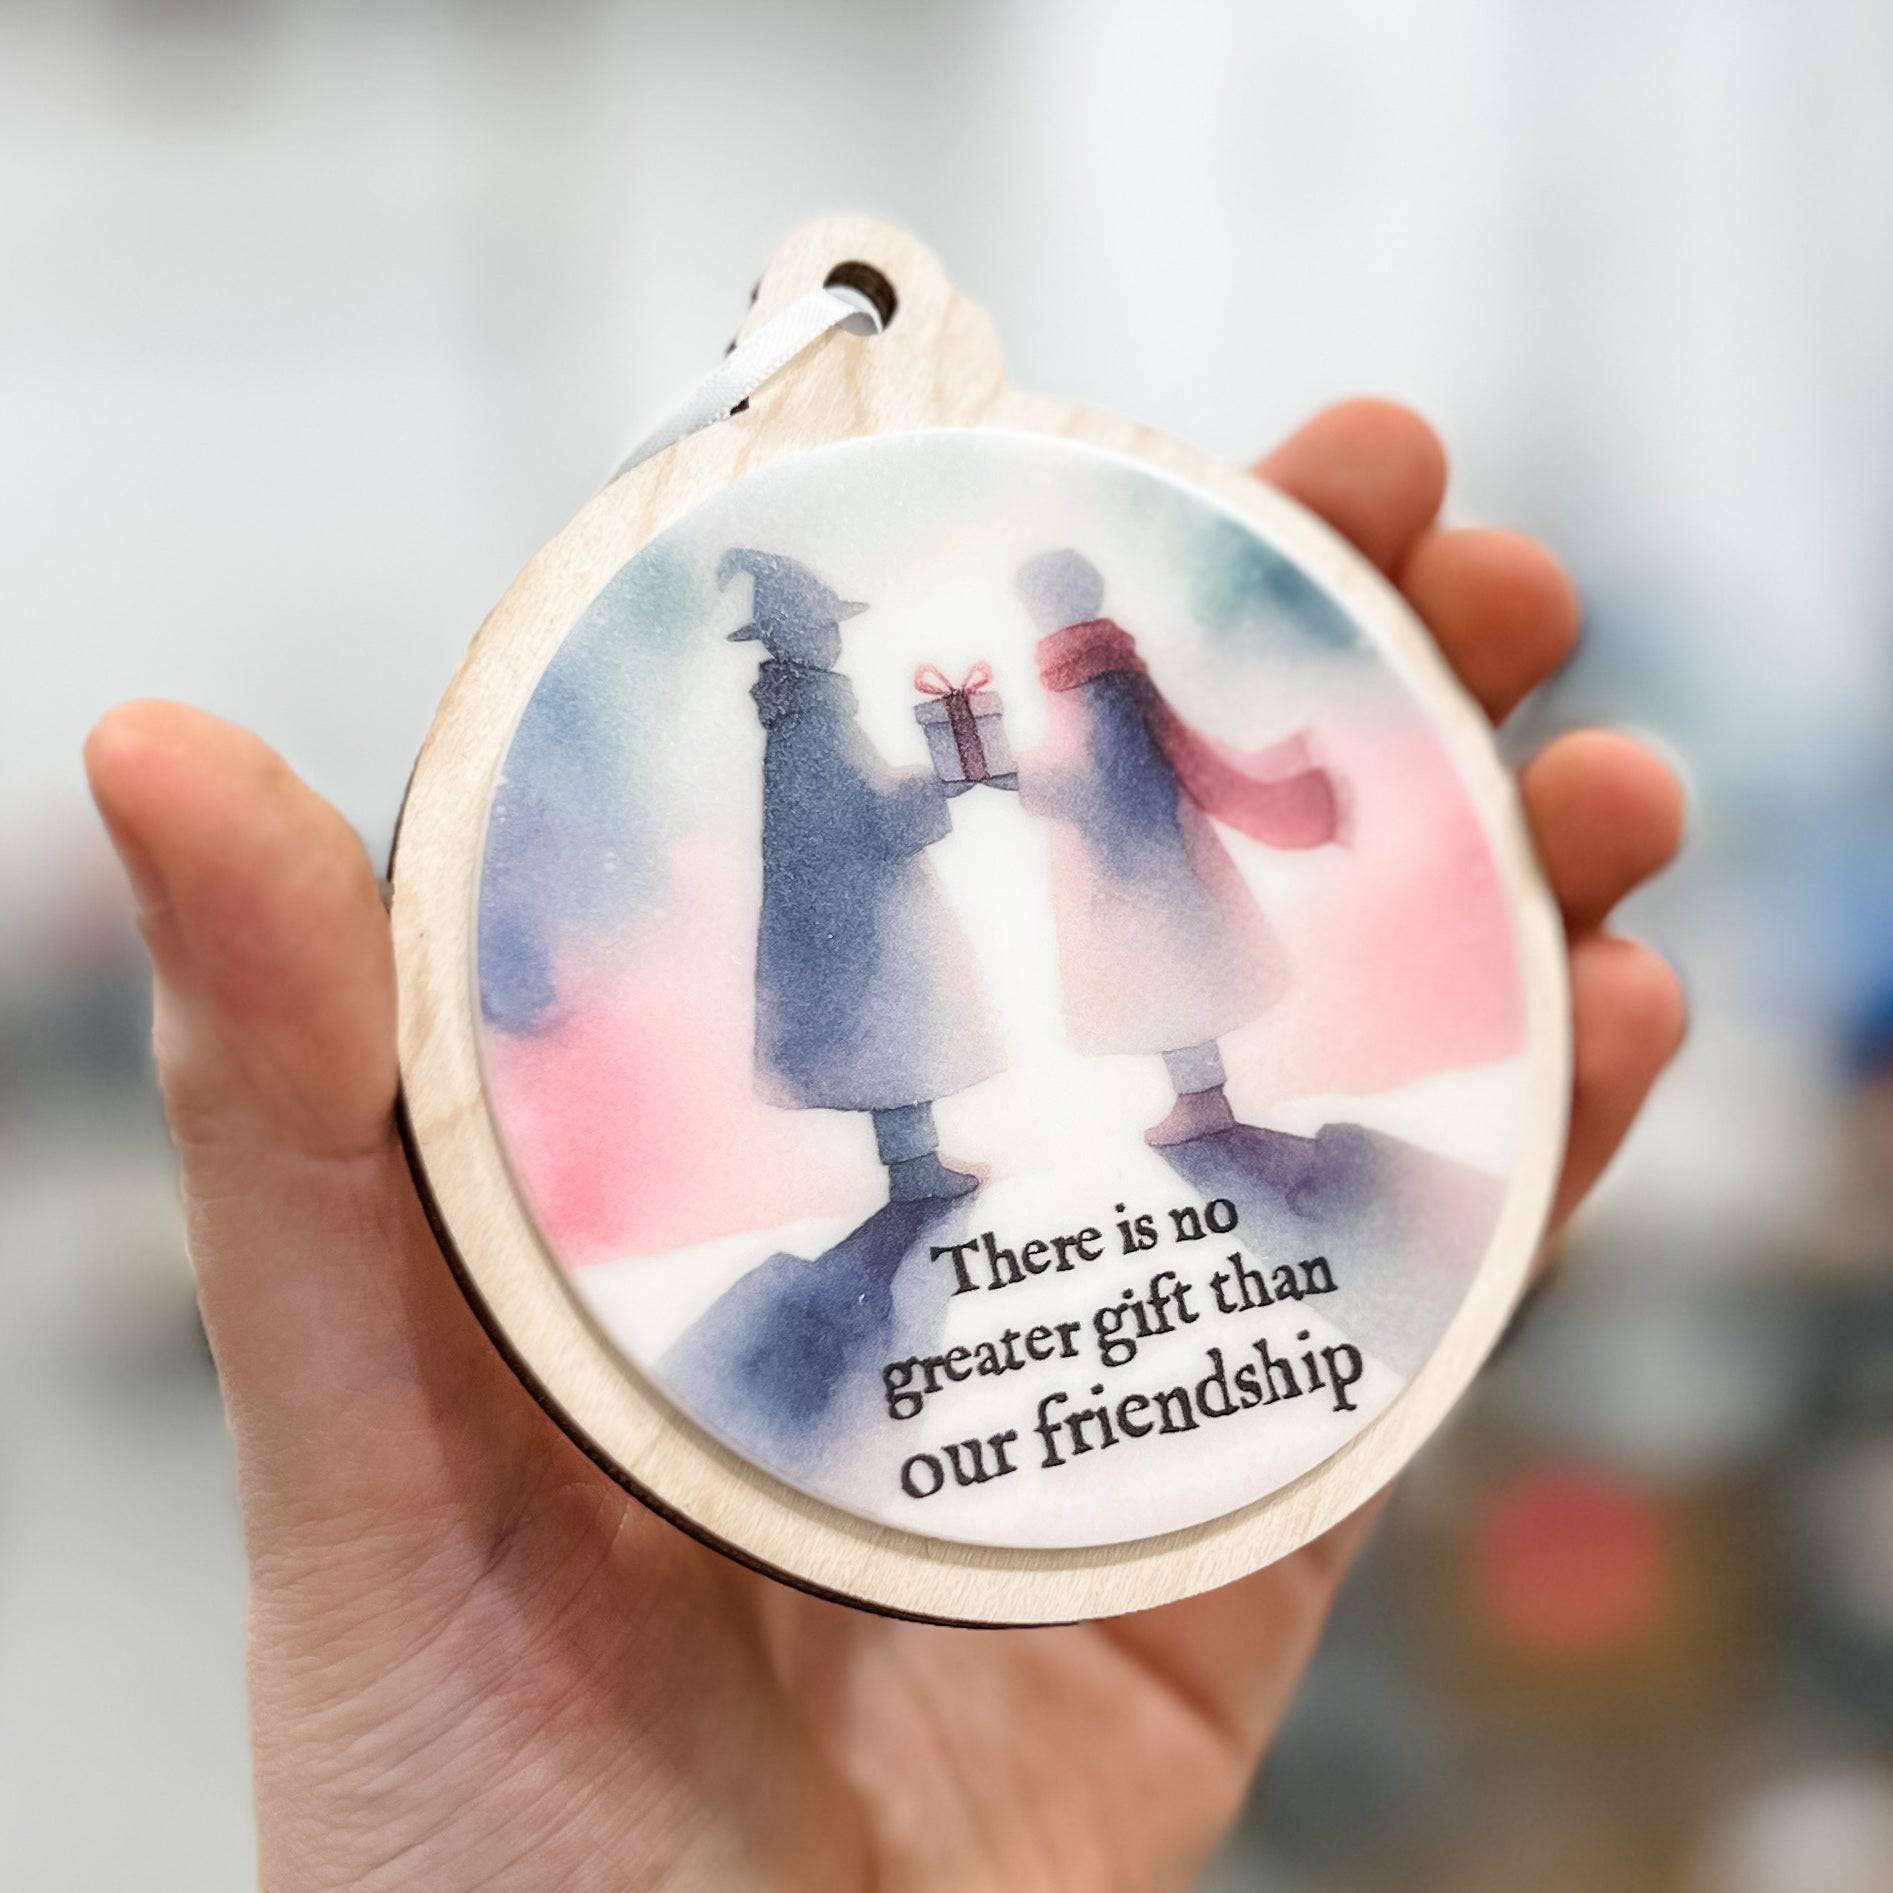 There is No Greater Gift Than Our Friendship 3D Wood & Acrylic Ornament - Sticks & Doodles